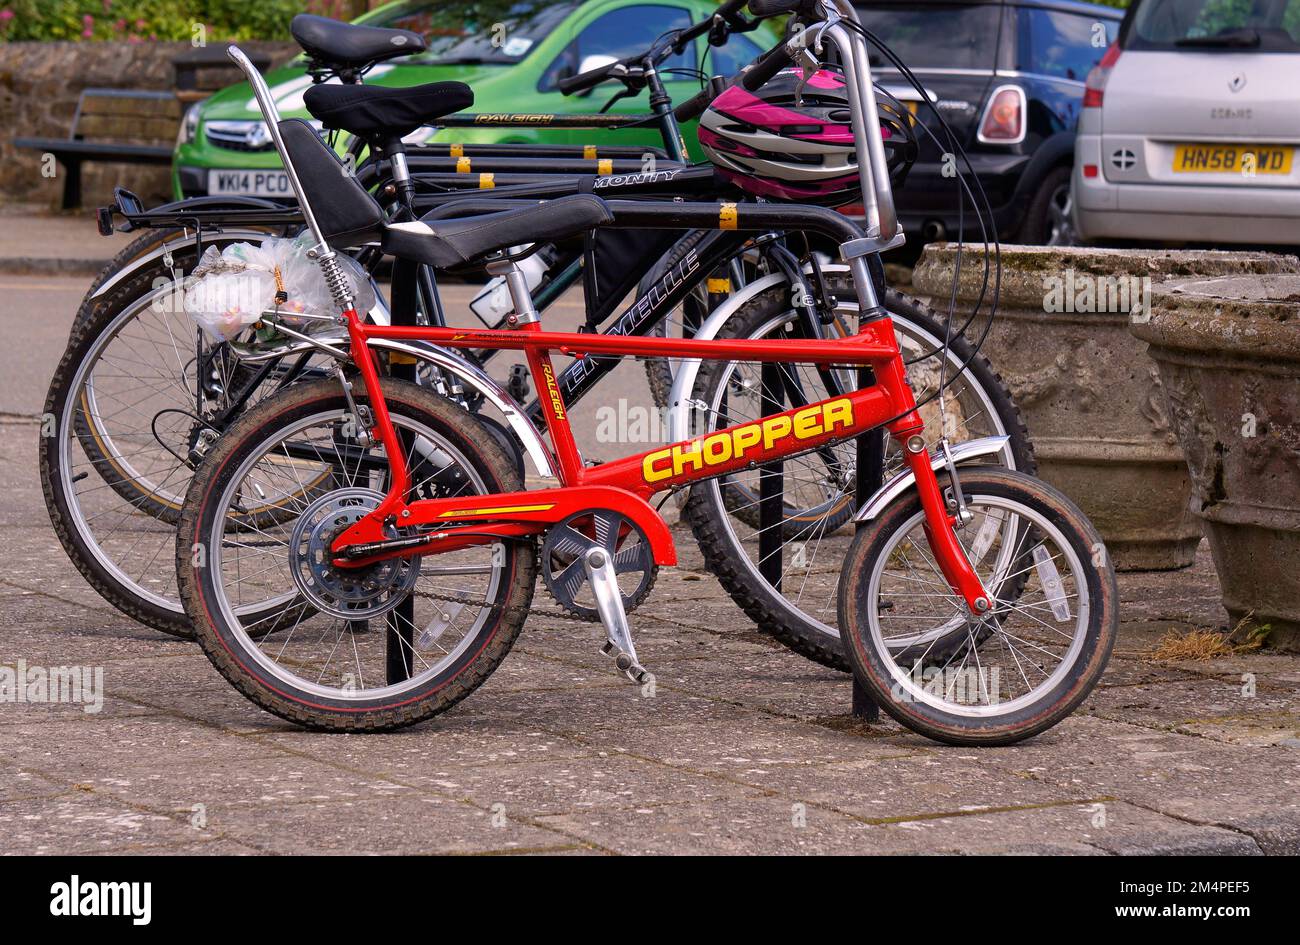 Original Vintage Raleigh Chopper Muscle Bike And More